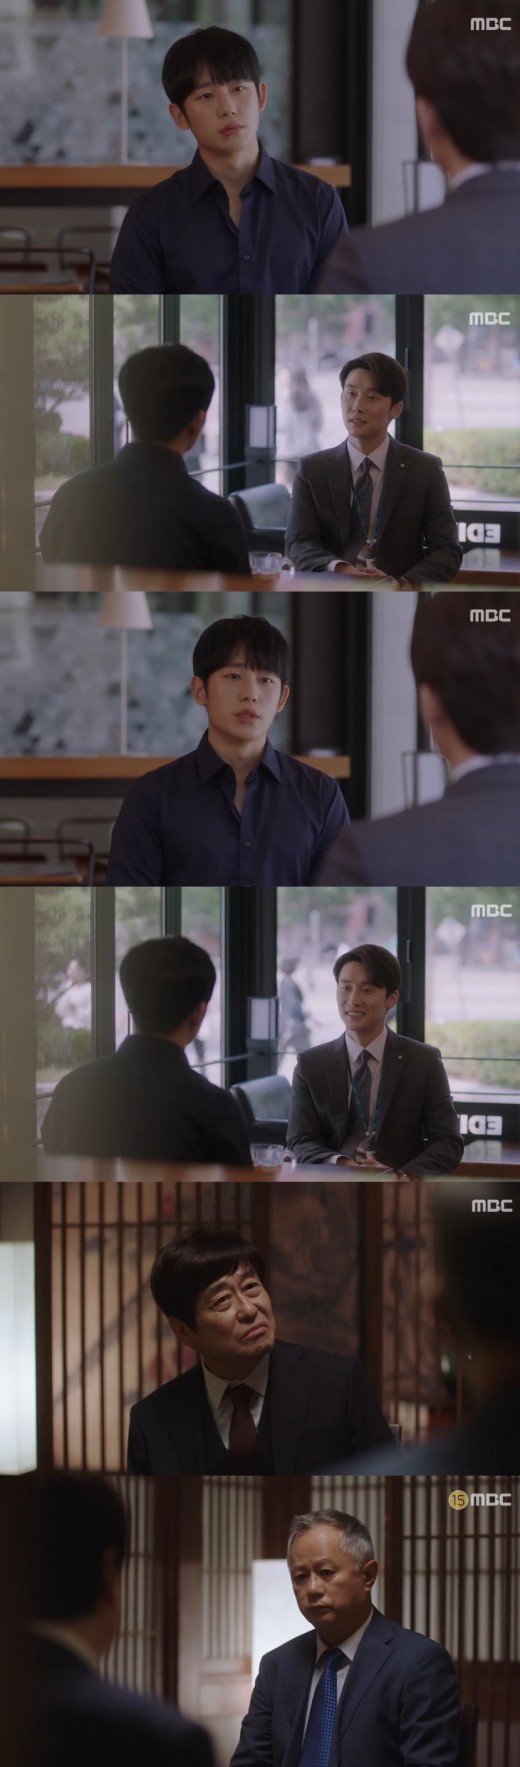 Jung Hae-in and Han Ji-min reconciled after an early Cold War.In MBCs Spring Night broadcast on the 10th, Choi Jung-in (Han Ji-min) and JiHo (Jung Hae-in) shared a kiss of reconciliation.Choi Jung-in and JiHo were in the cold war, and Choi Jung-in, who needed time to think, said, What is it that I already think of JiHo?Isnt it a problem to pretend to be okay when you hear that? said Choi Jung-in. Im not fast enough.On the same day, while the misconception was created by the intervention of Kiseok (Kim Jun-han), JiHo immediately found the Kiseok and warned, I talked to you, not to touch Choi Jung-in.JiHo also tried to drive the stele away with the words, How do you get rid of this Choi Jung-in life? The stele said, Stop talking.Im willing to give up if you give up.So JiHo said, If I give up, do you think I can meet Choi Jung-in again? And the stele said, Who is meeting? You know.My goal is JiHo, he snorted.Of course, if Choi Jung-in wants to come back, theres nothing he cant accept. He thought about getting married. You cant handle it.Im not getting any more than Choi Jung-in for your cheap romance, he said.JiHo also threw a game. JiHo said, This is not a warning. Its a threat. How do you write about me and my son illegally?I pretended not to see Choi Jung-in, but I did not go over because I did not have a stomach. When the stele was angry, Do you dare touch my father? JiHo said, Im not afraid. I dared touch my child, but Im afraid of what.The countermeasure for the stele is to arrange a meeting between the United Kingdom (Kim Chang-wan) and Taehak (Song Seung-hwan). However, unlike the expectation of stele, the kiss was reconciled with a deep kiss, raising expectations of Happy Endings.